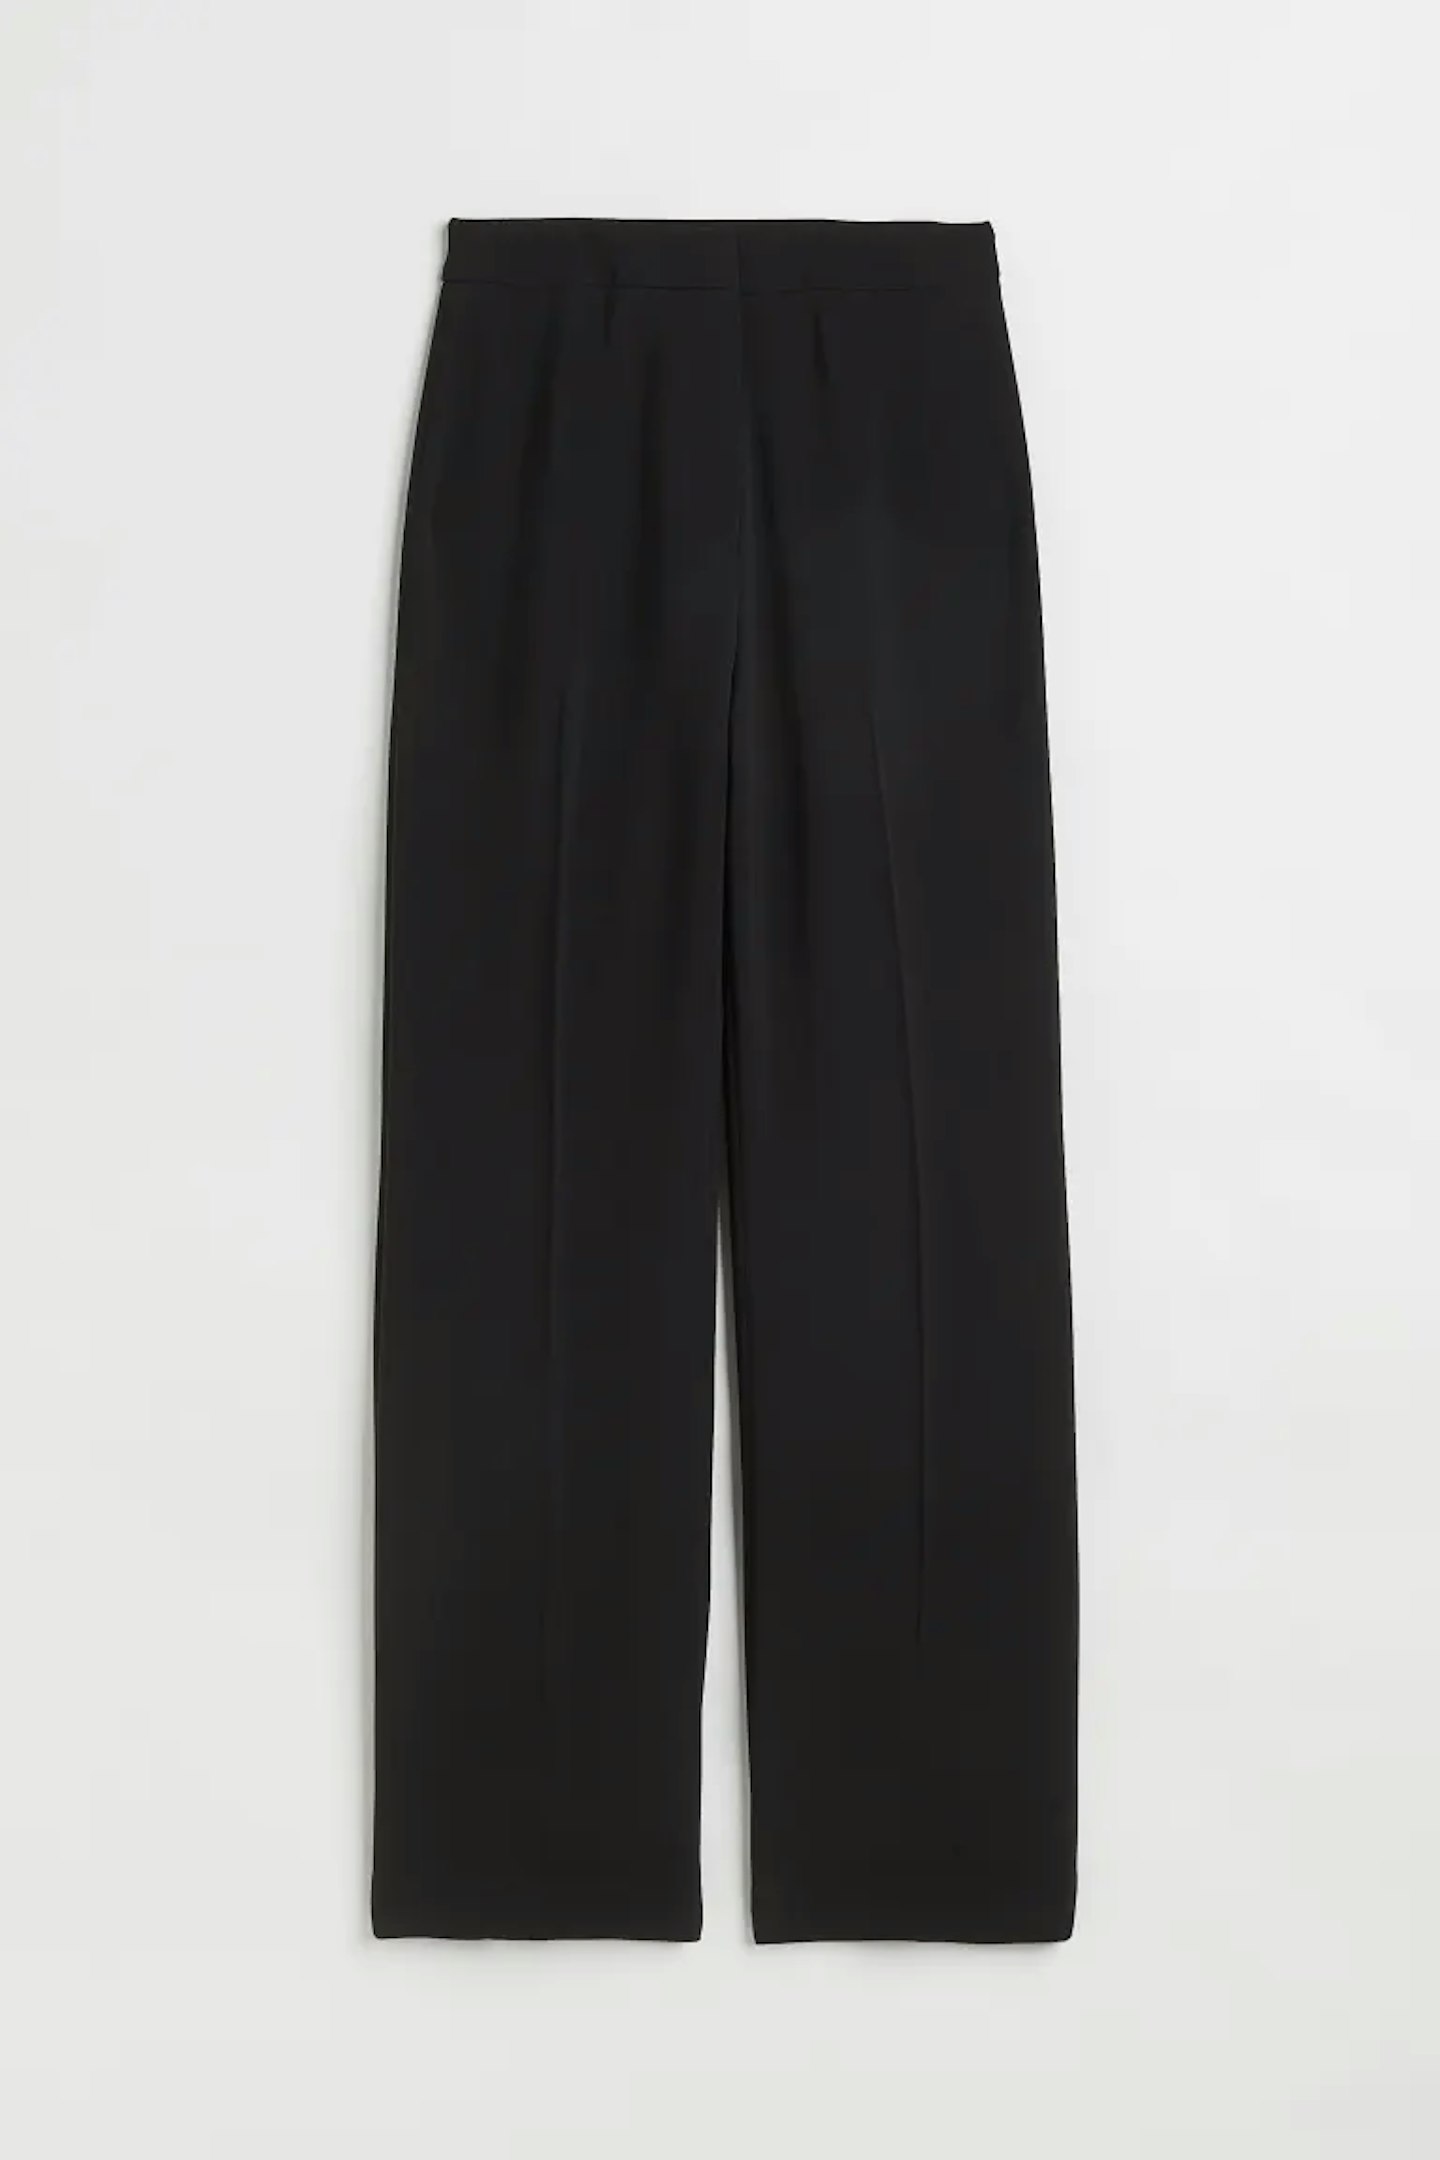 H&M, Wide Trousers